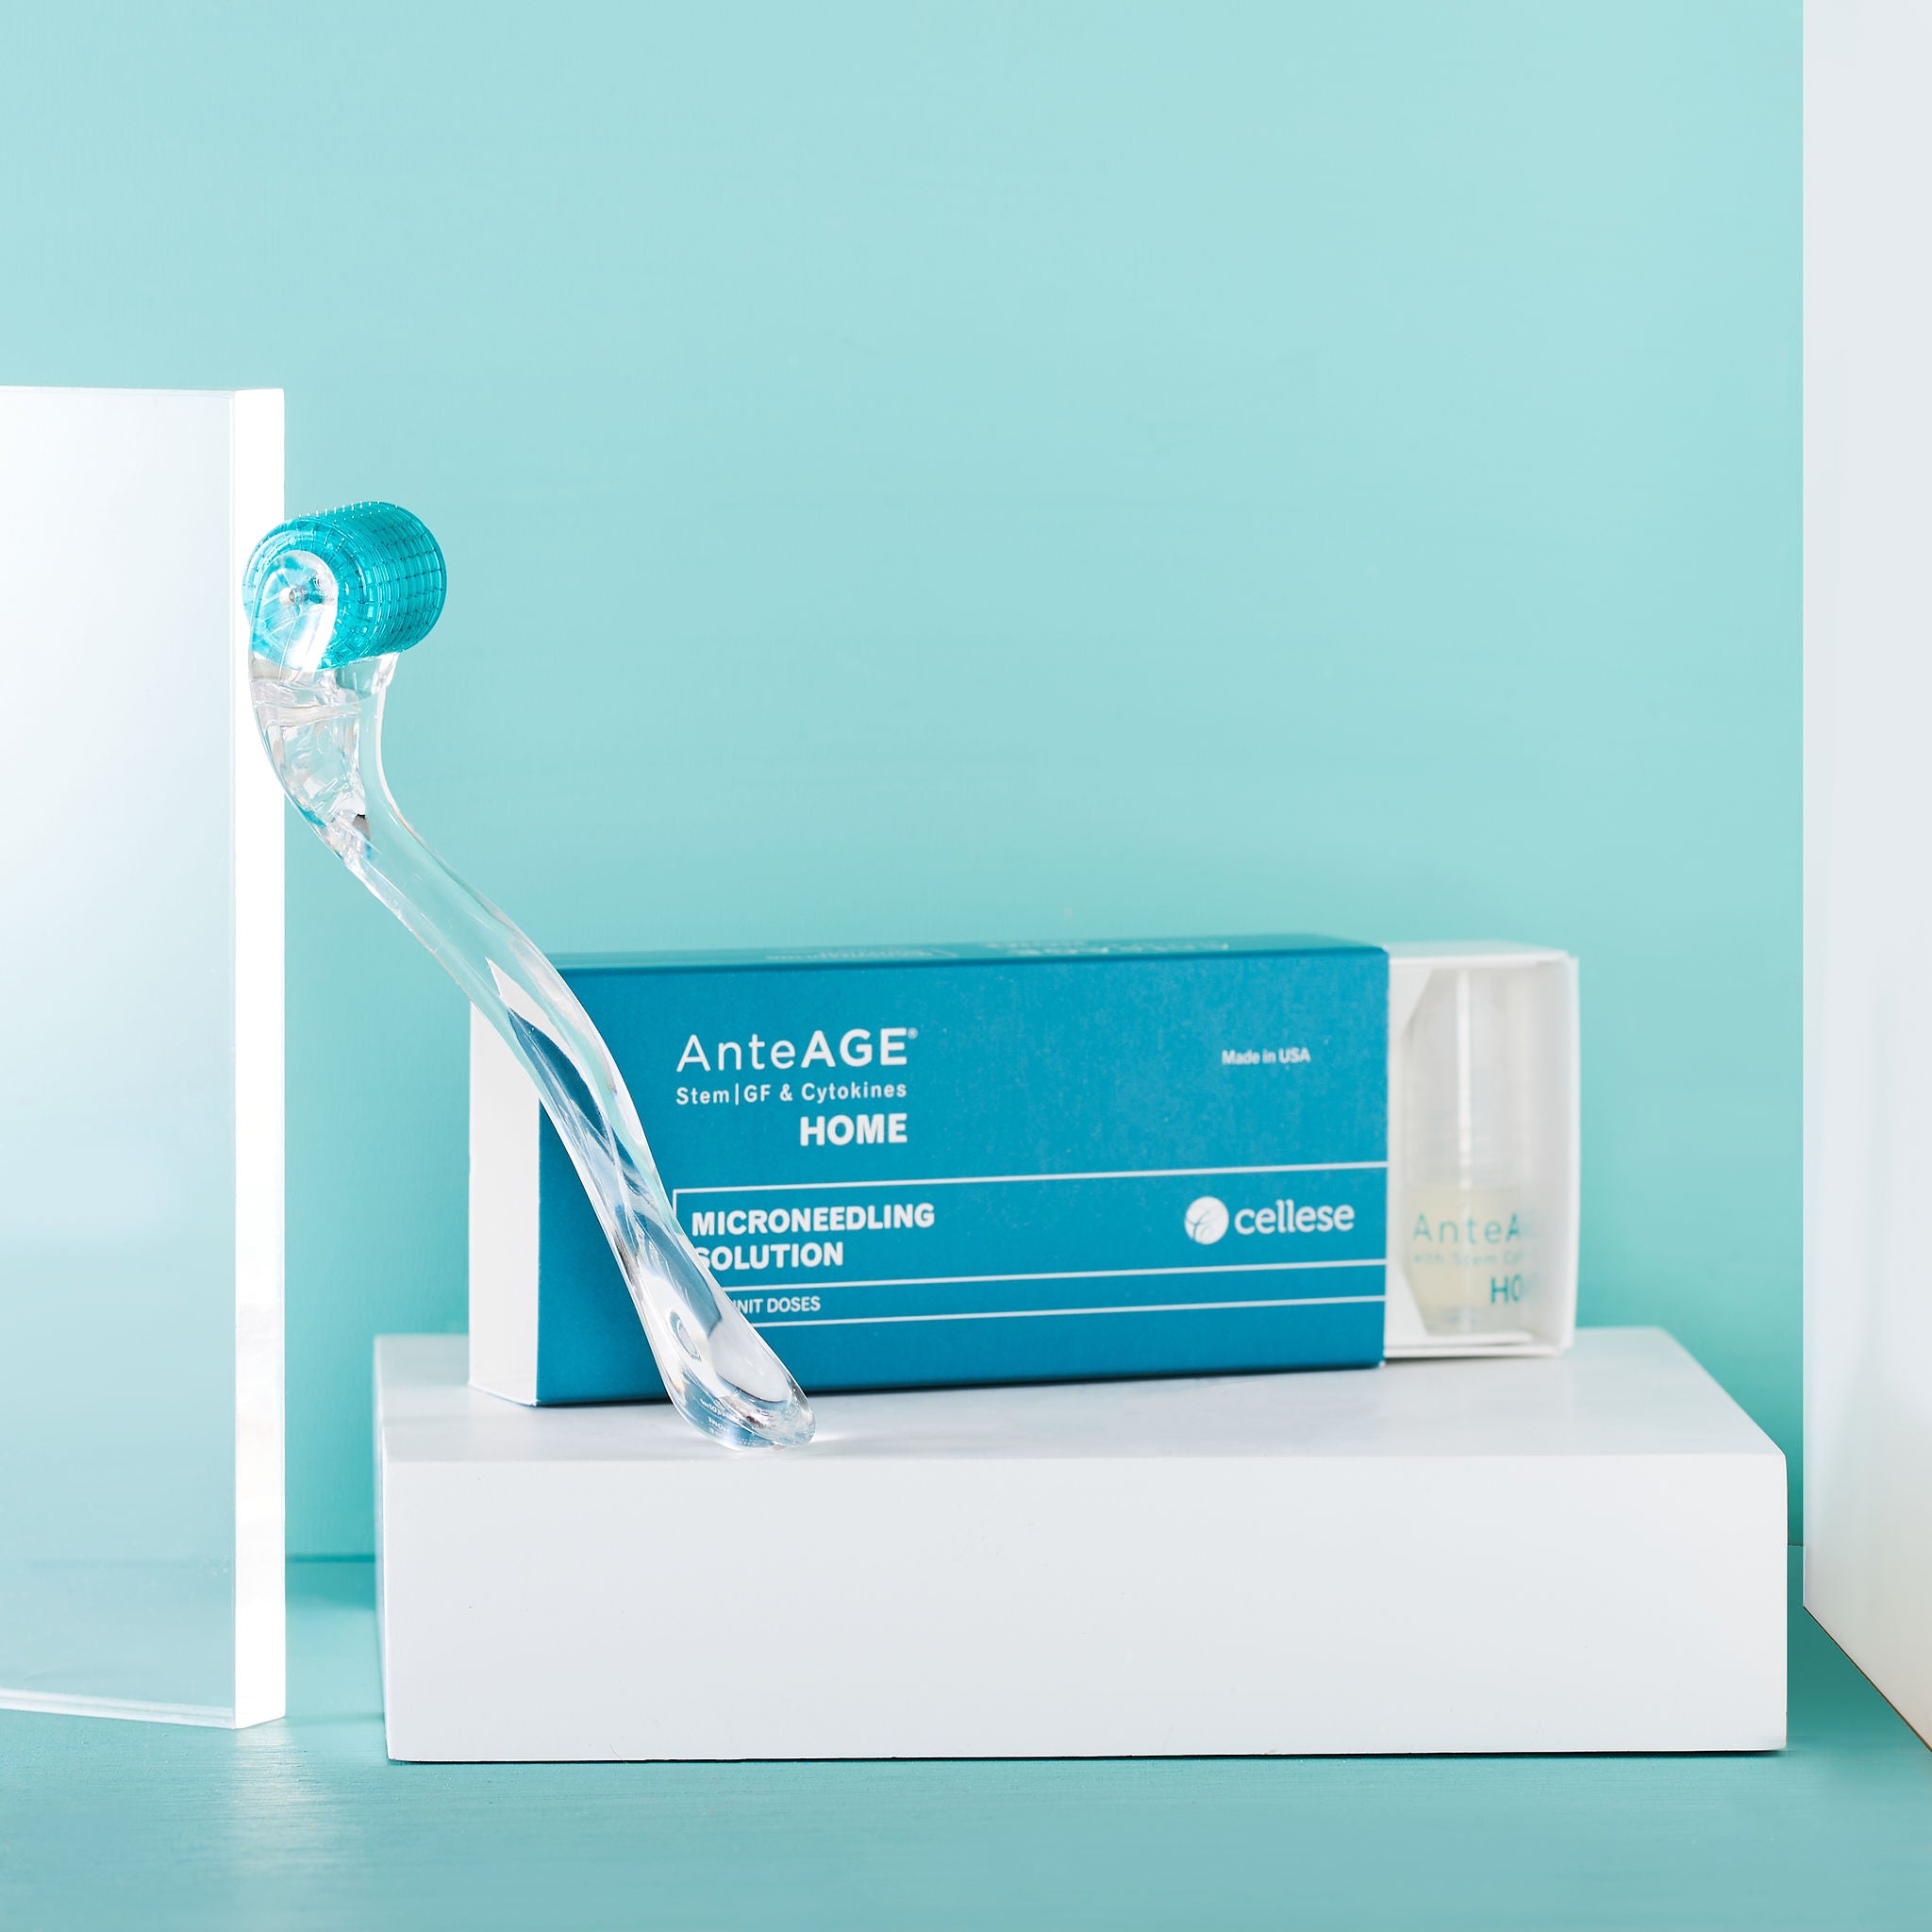 AnteAGE® Home Microneedling System - Click to Buy!